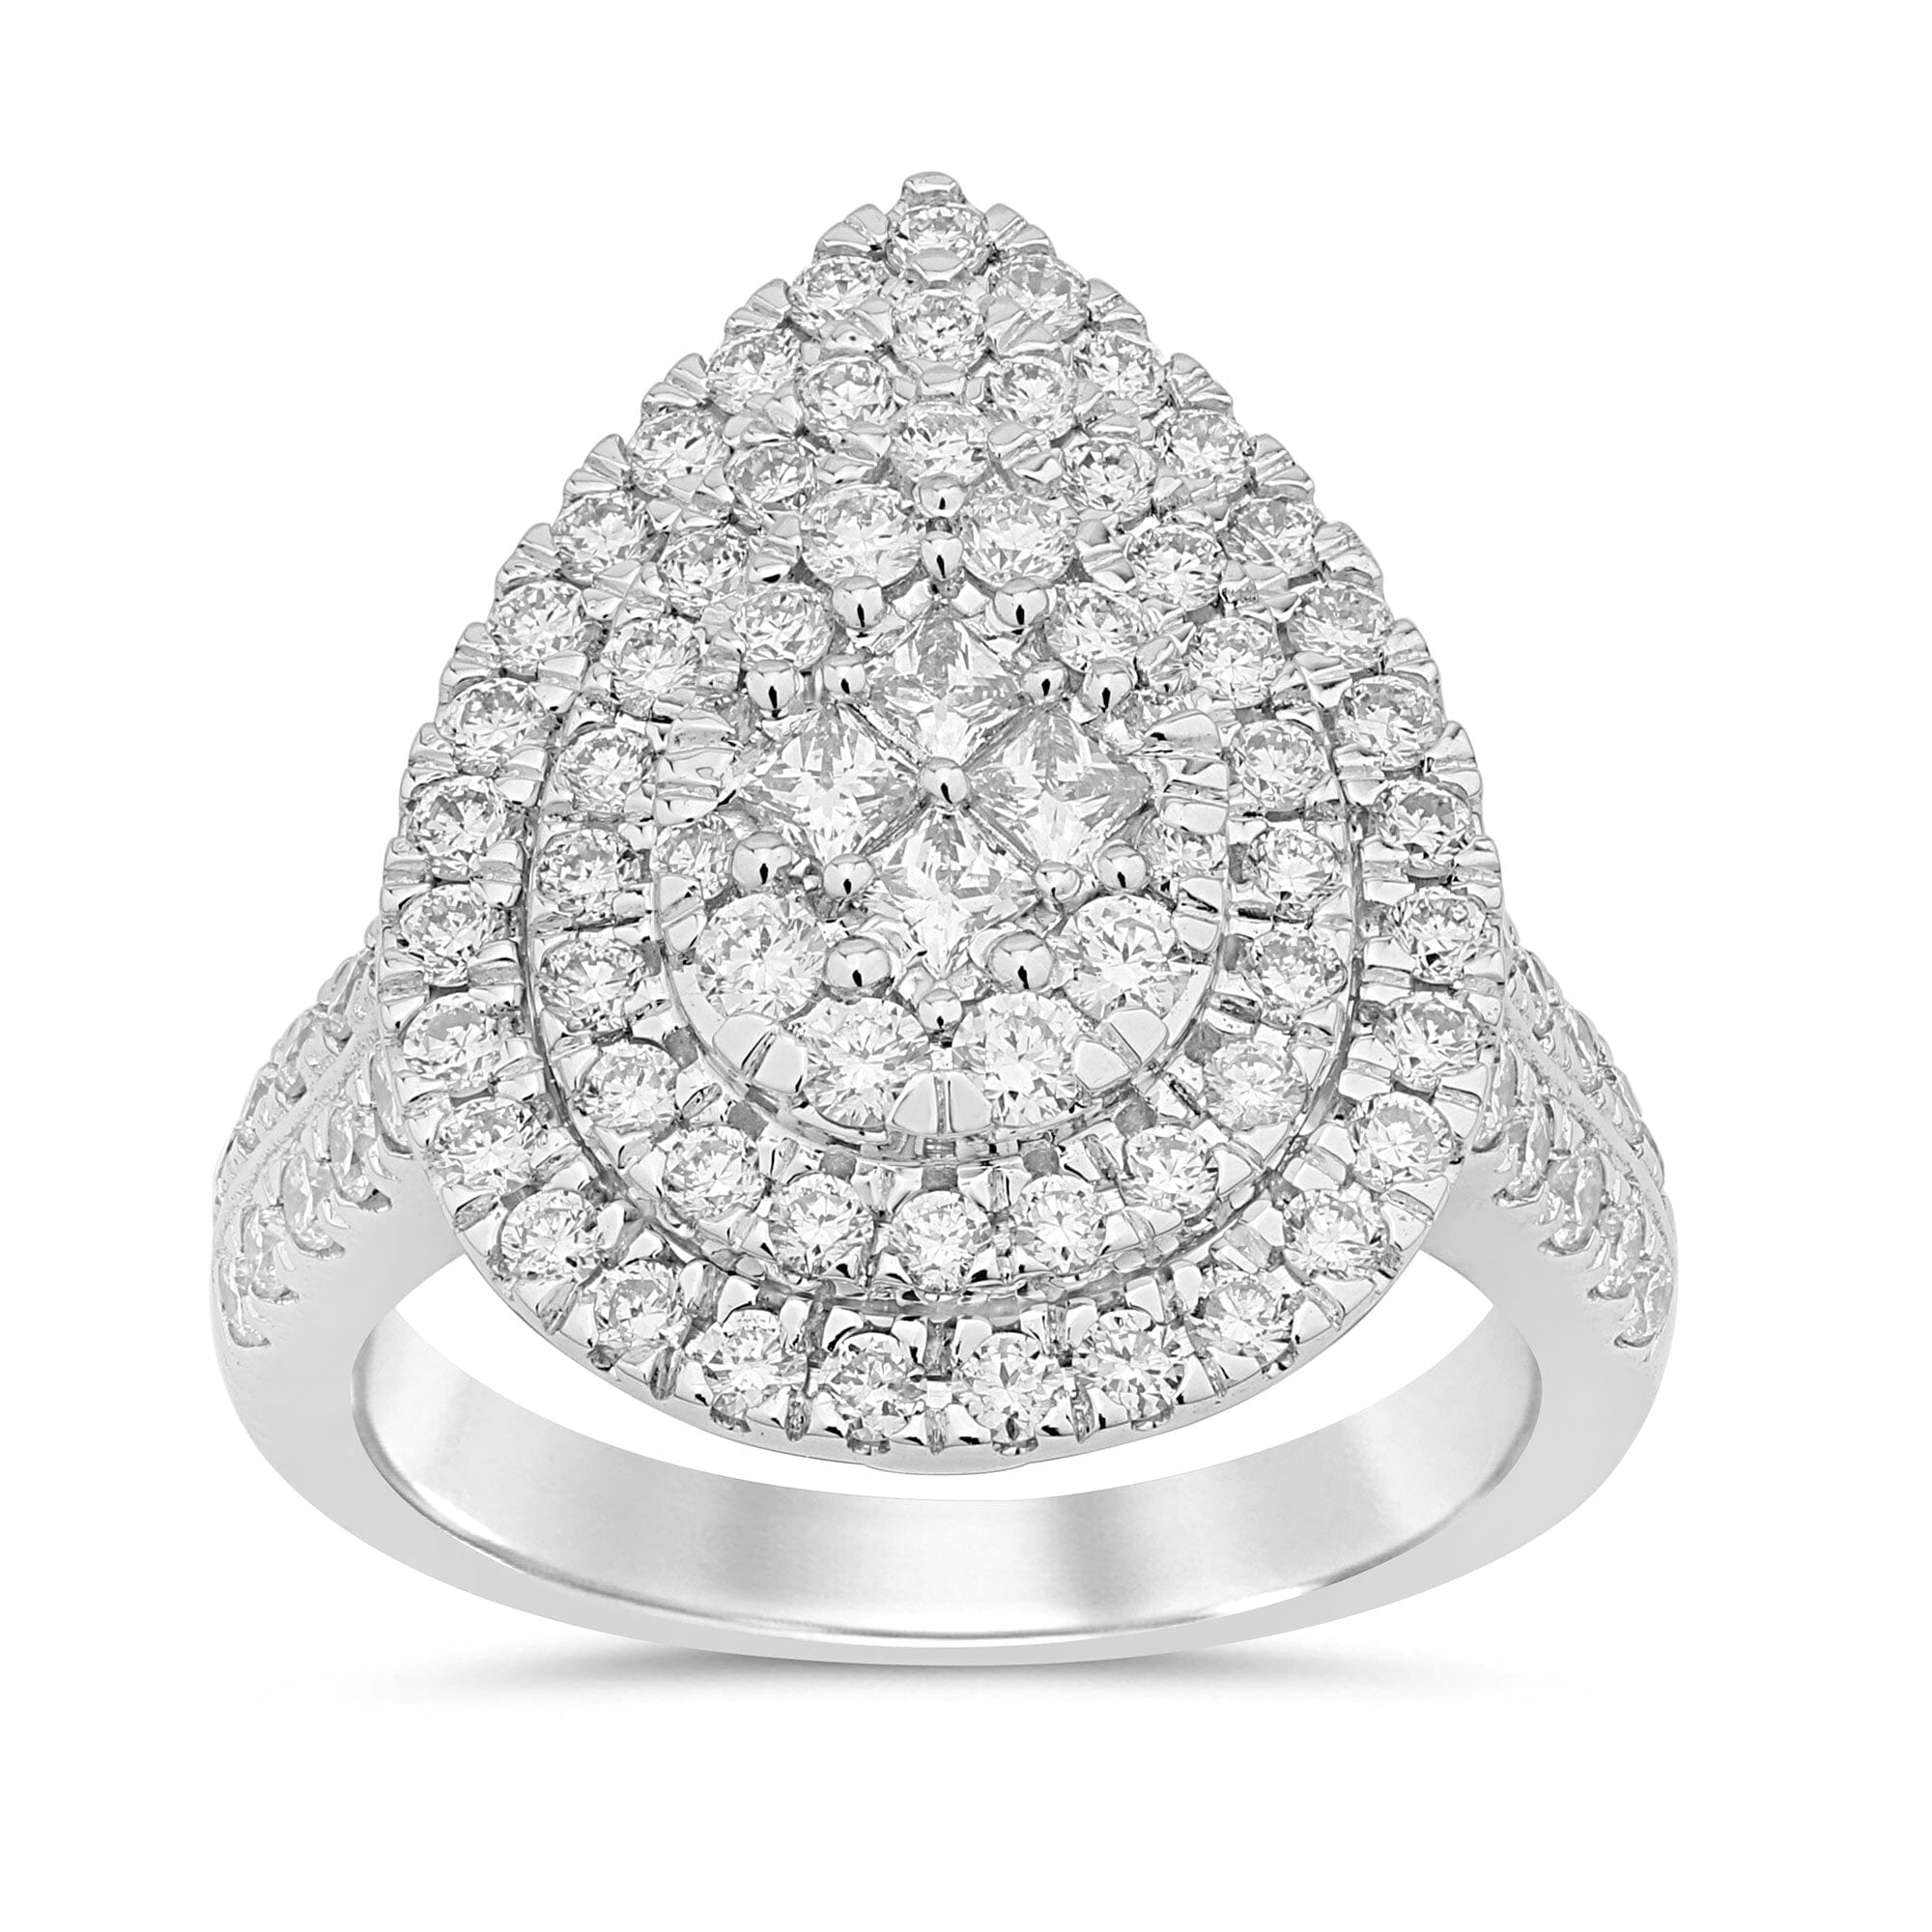 Meera Double Pear Halo Ring with 1.50ct of Laboratory Grown Diamonds in 9ct White Gold Rings Bevilles 